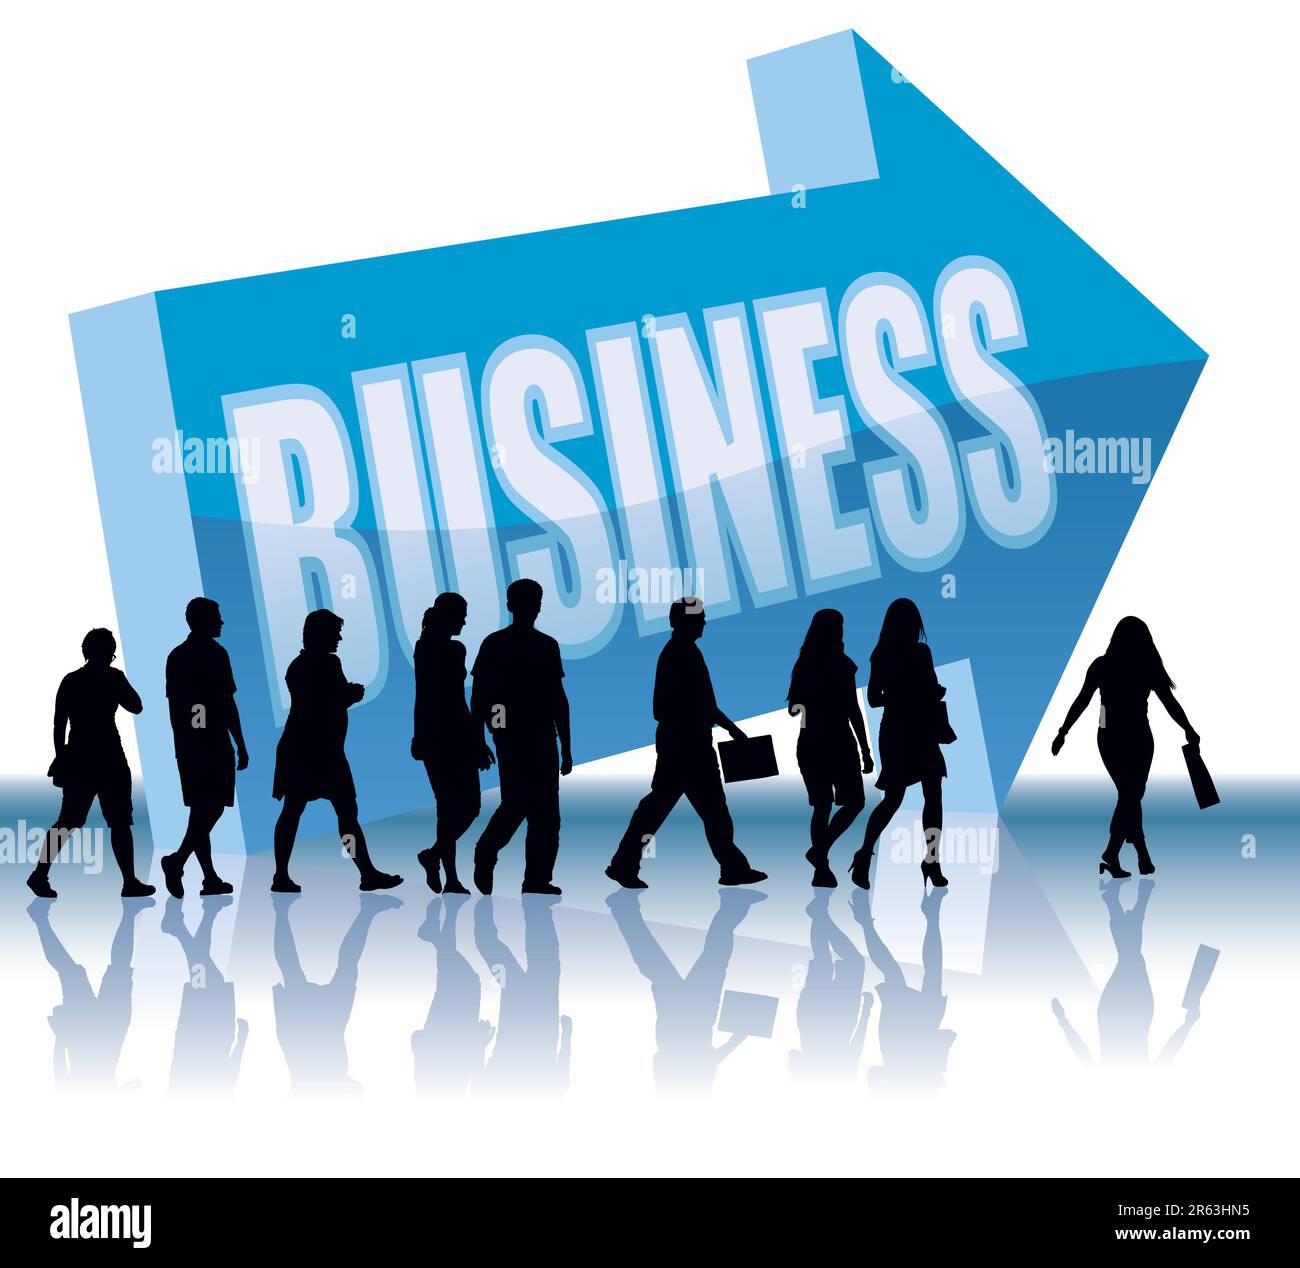 People are going to a direction - Business, conceptual business illustration. Stock Vector